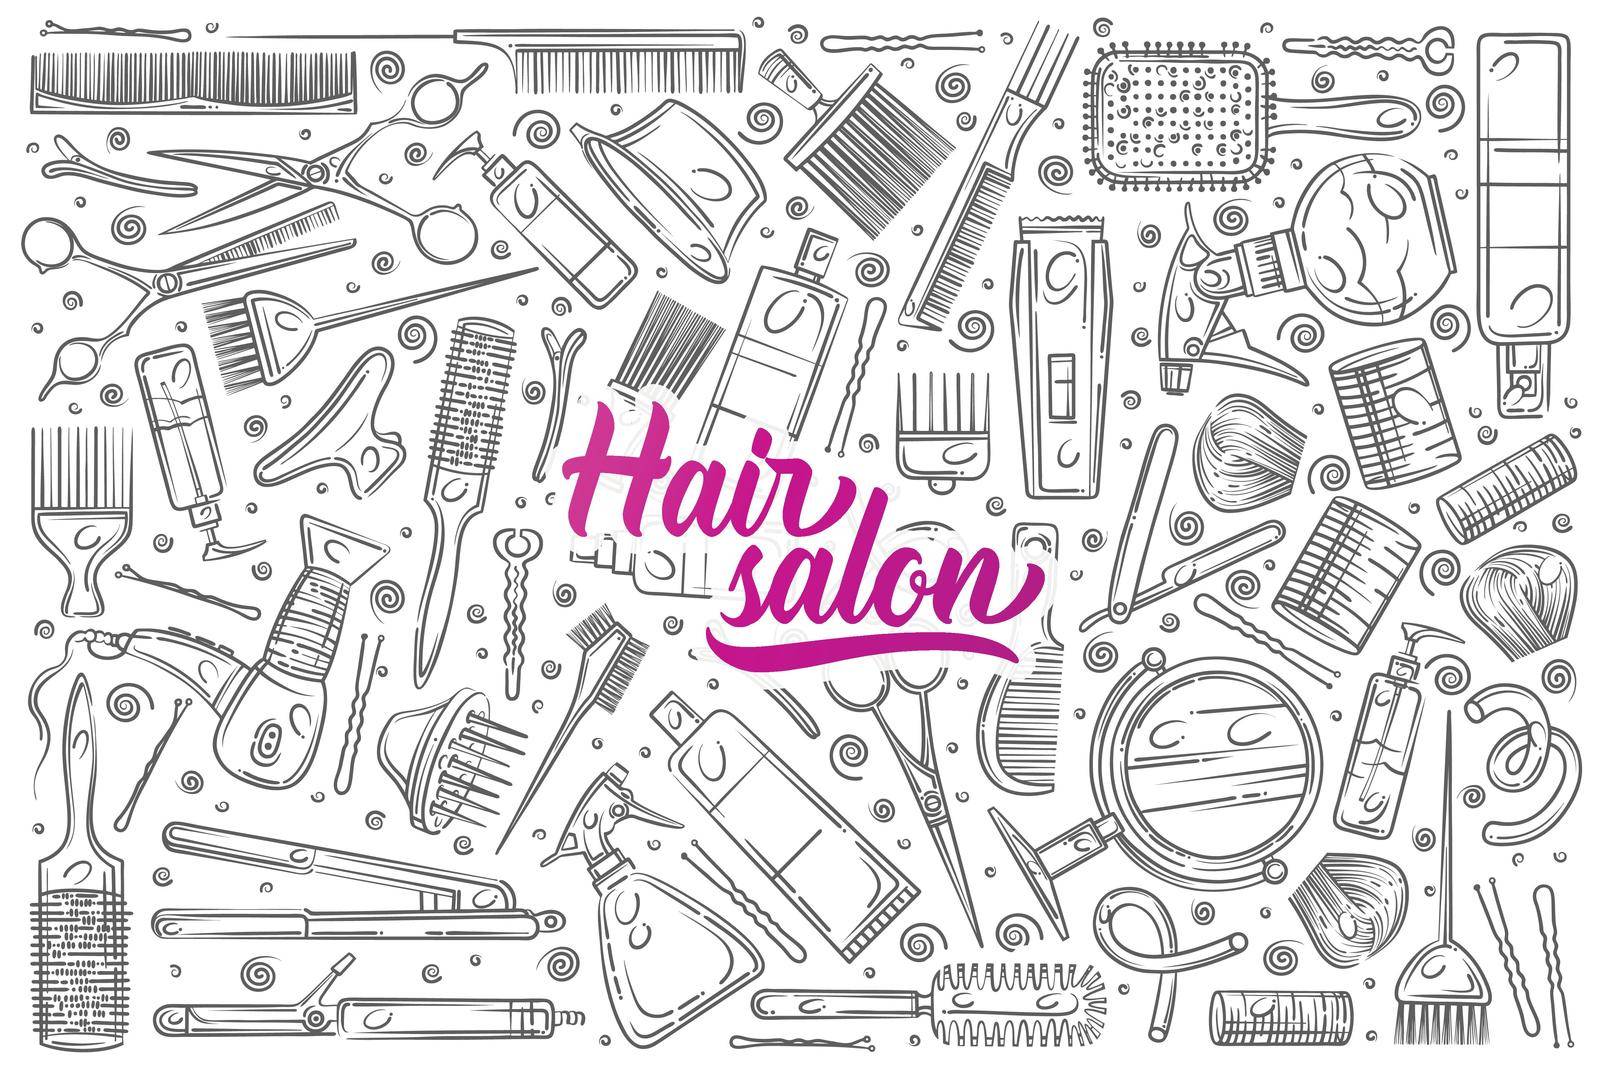 Hand drawn hair salon tools. Equipment for professional hairdresser doodle set background